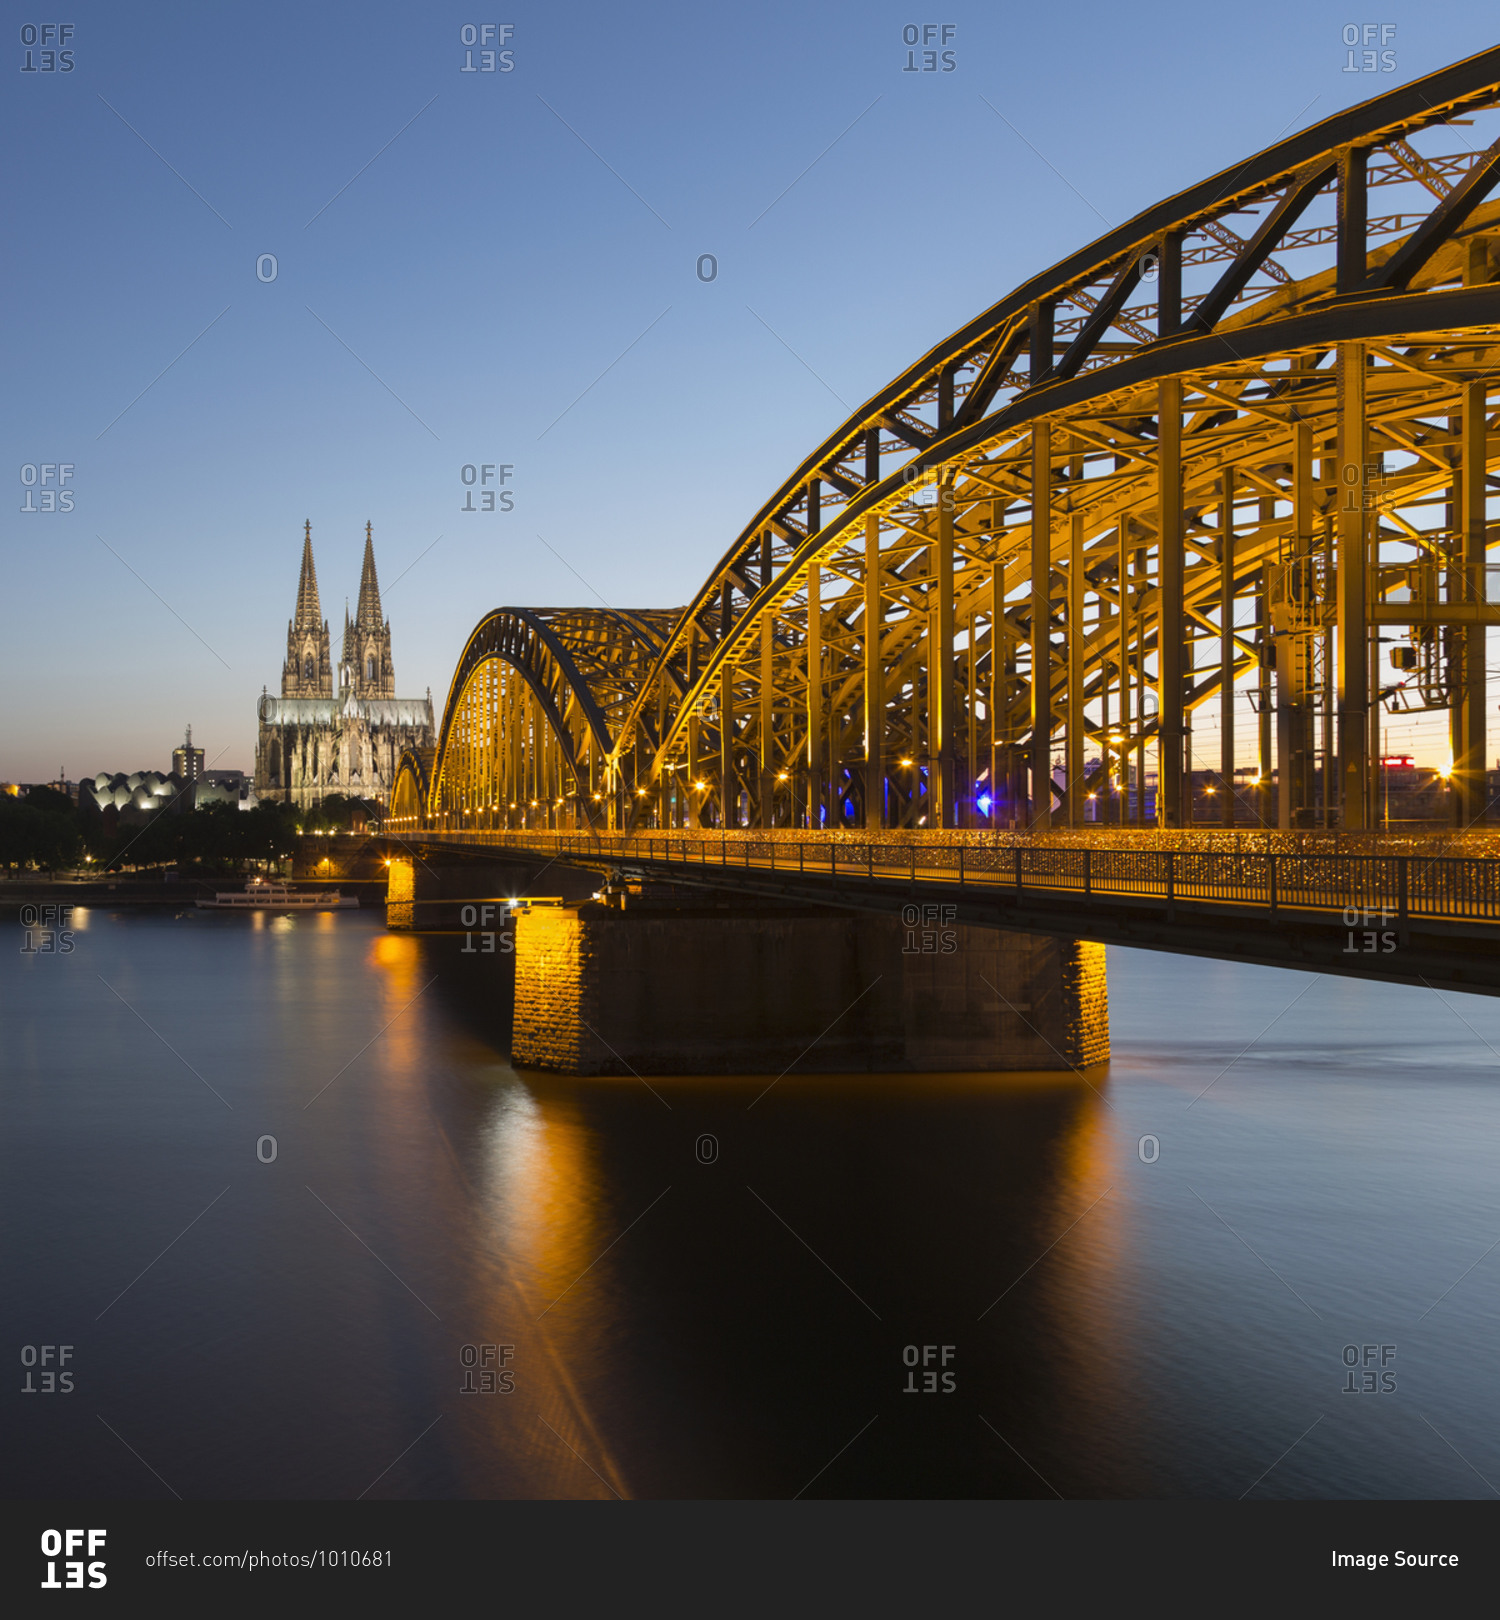 View of Cologne Cathedral (Koelner Dom) and Hohenzollern Bridge (Hohenzollernbruecke) crossing Rhine River at dusk, Cologne, Germany